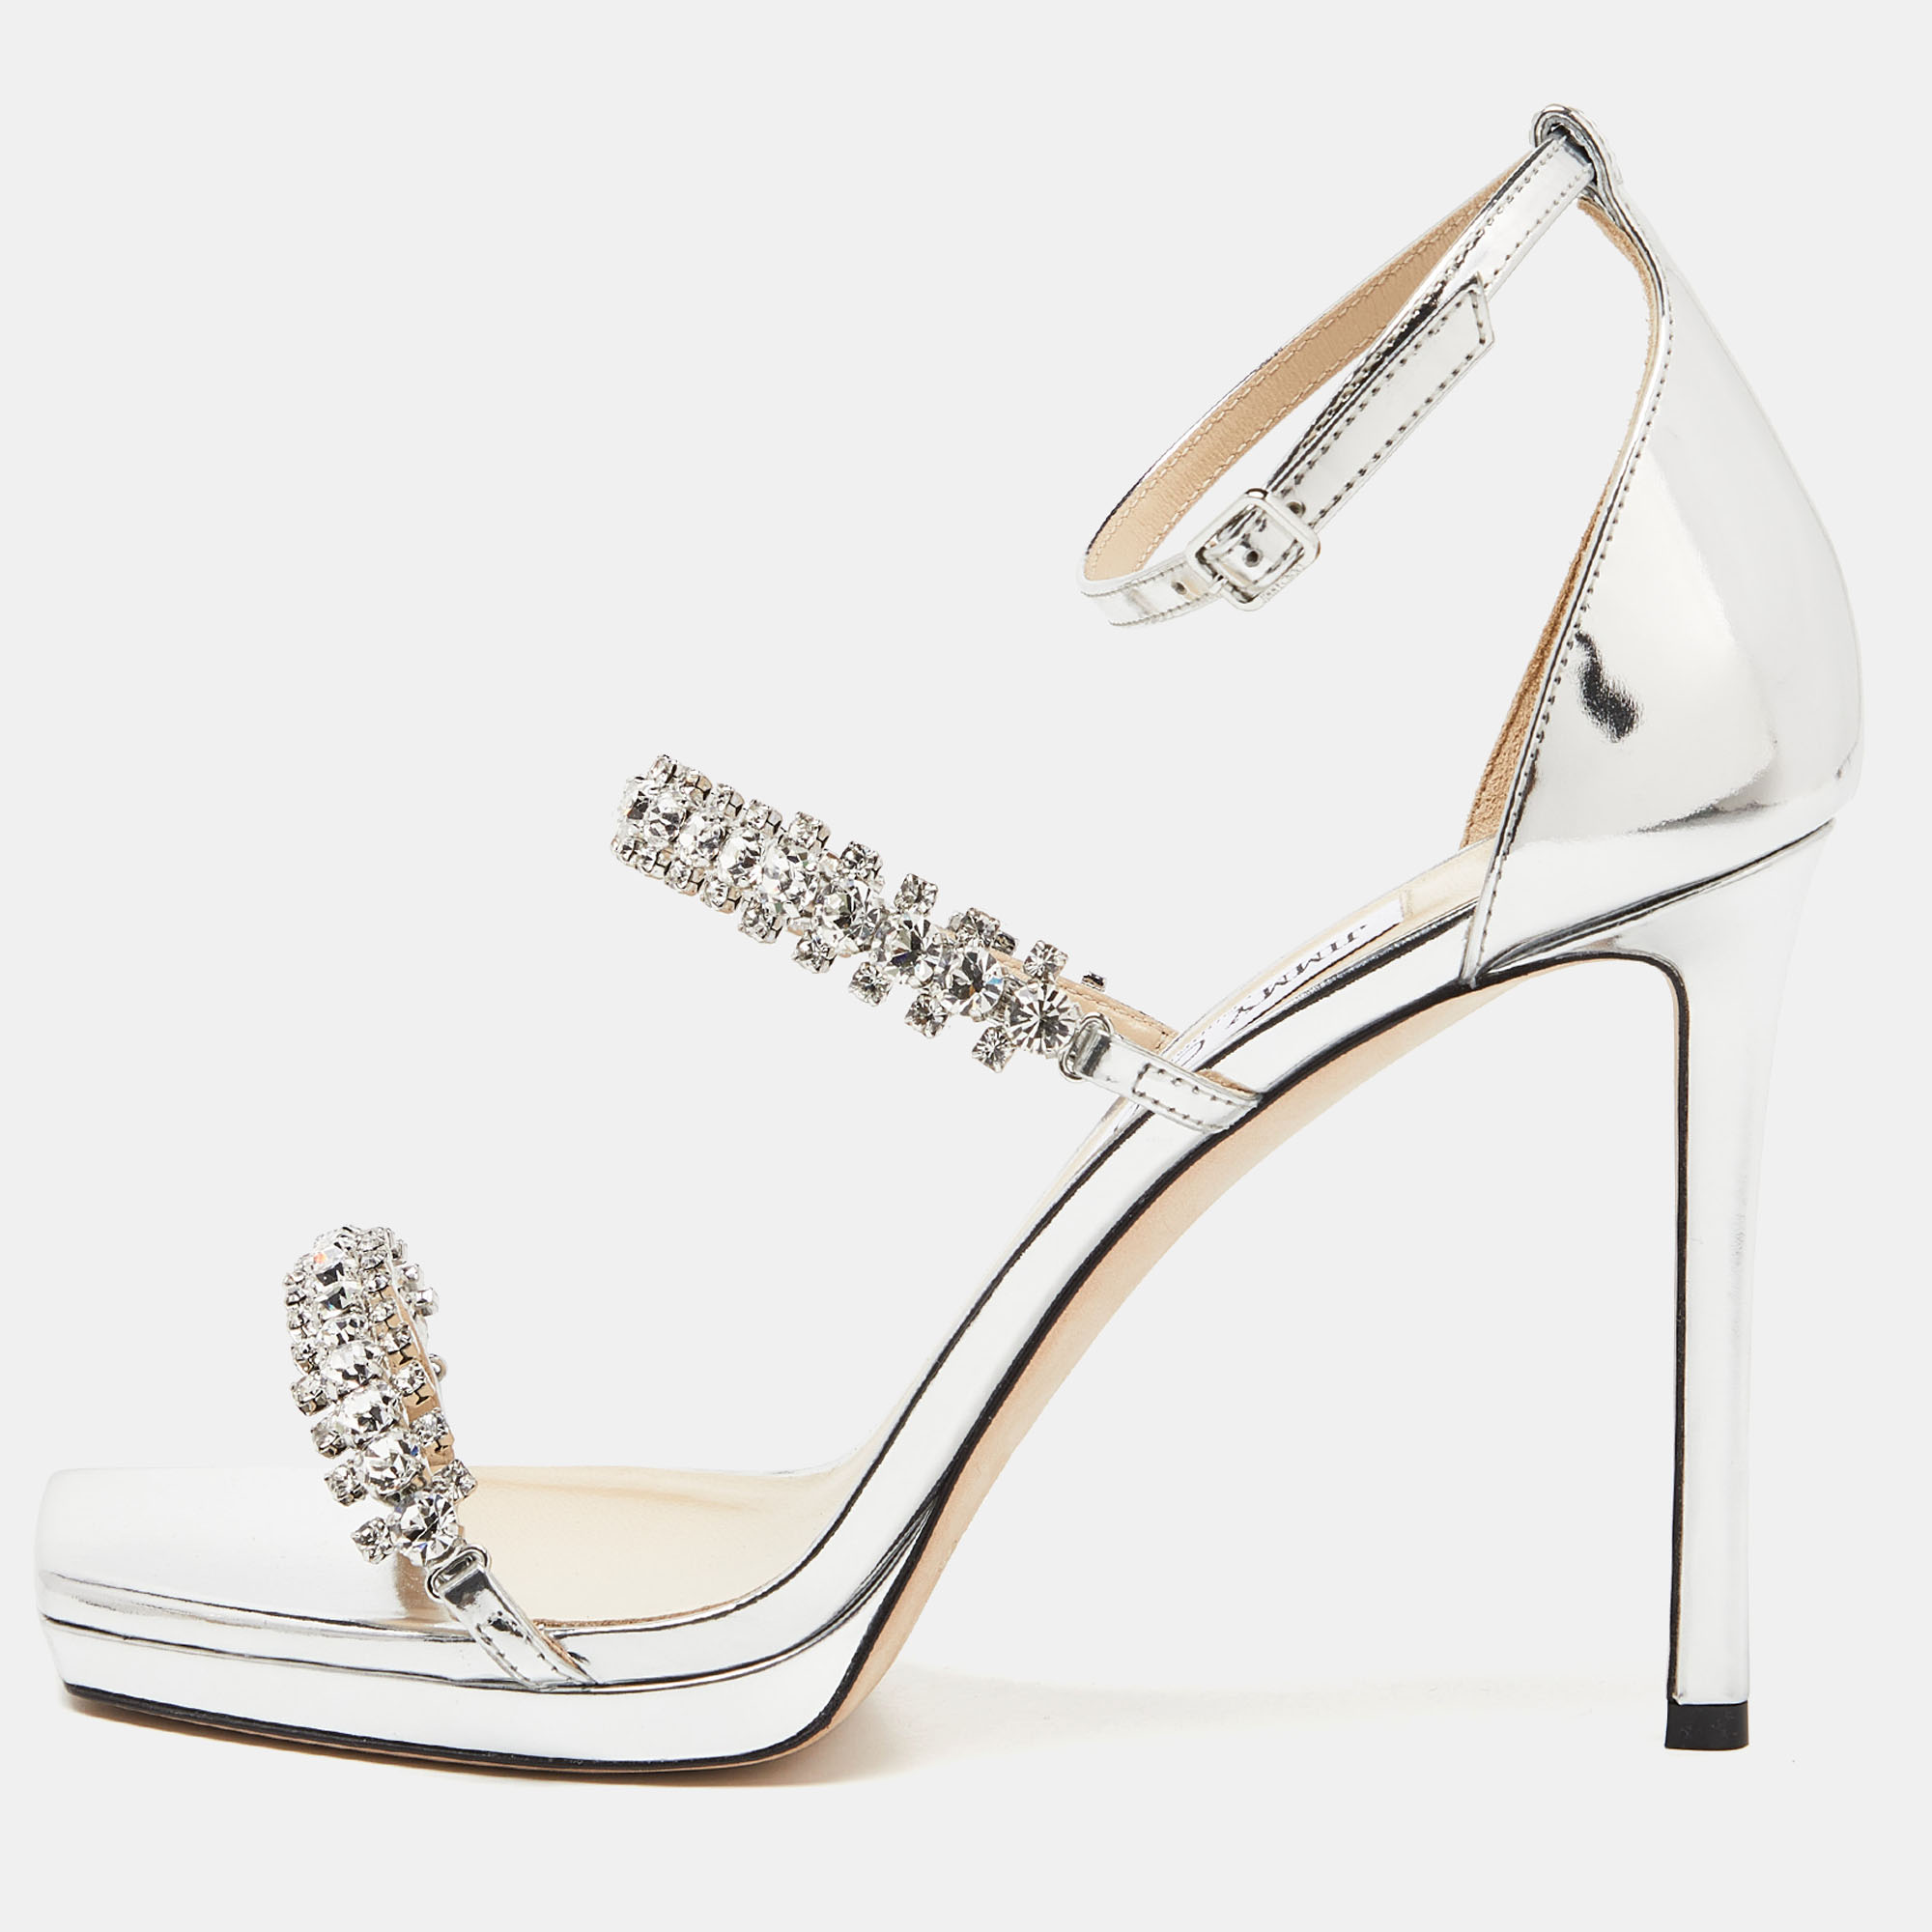 Jimmy choo silver laminated leather crystal embellished ankle strap sandals size 41